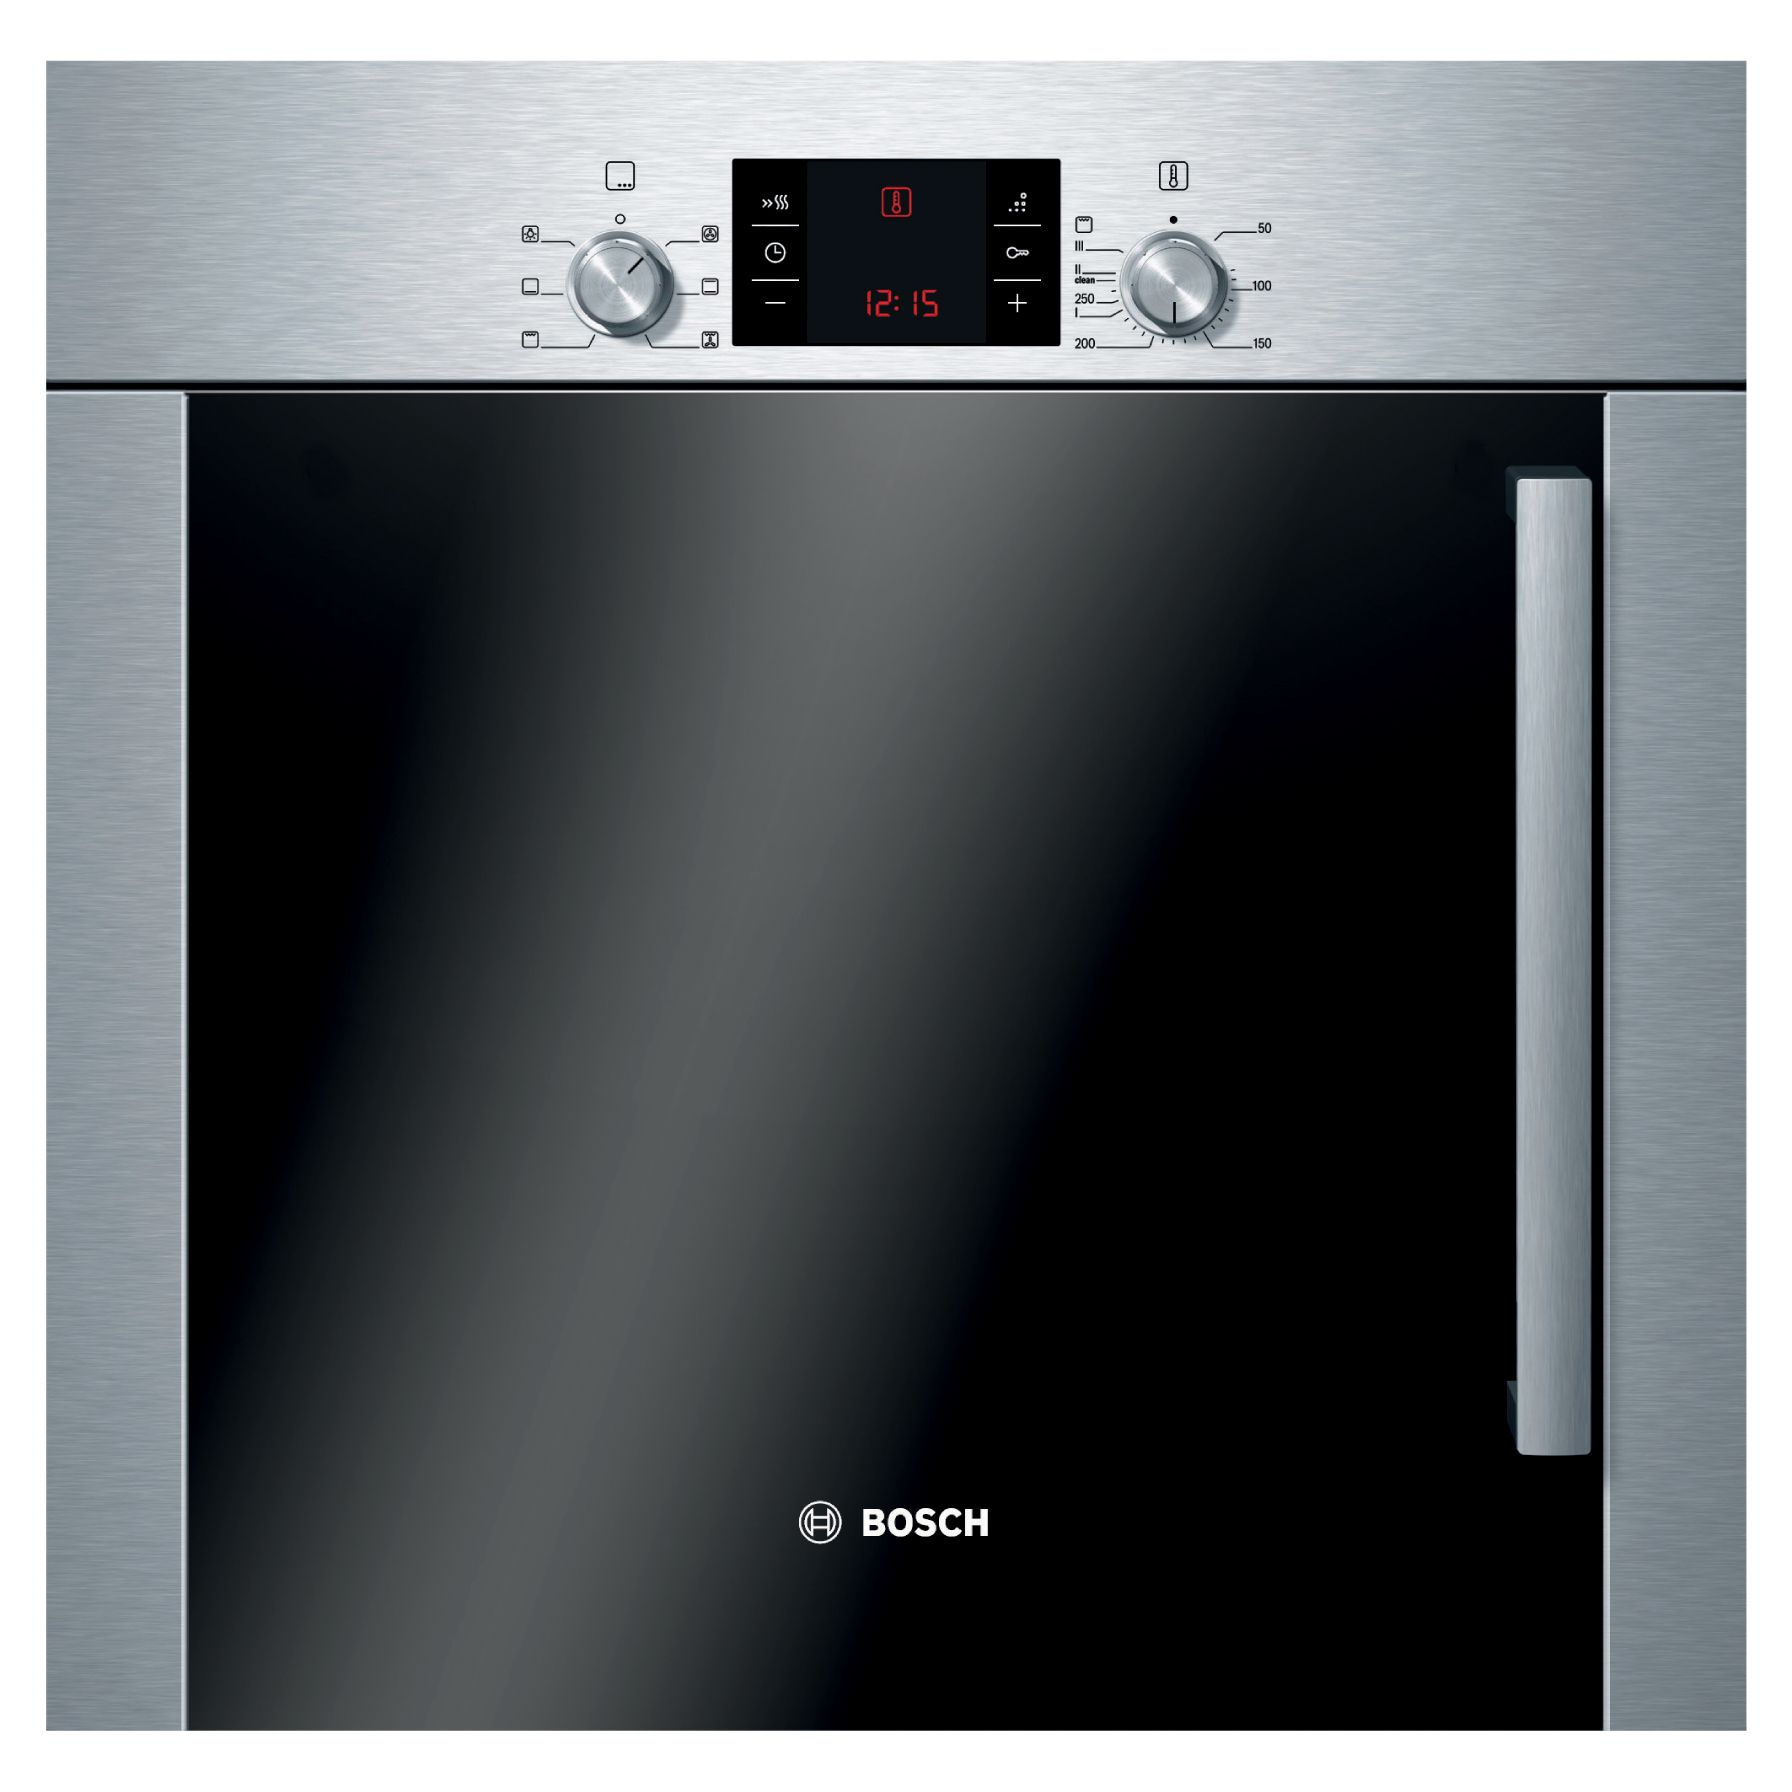 Bosch HBL43B250B Single Electric Oven, Stainless Steel at JohnLewis